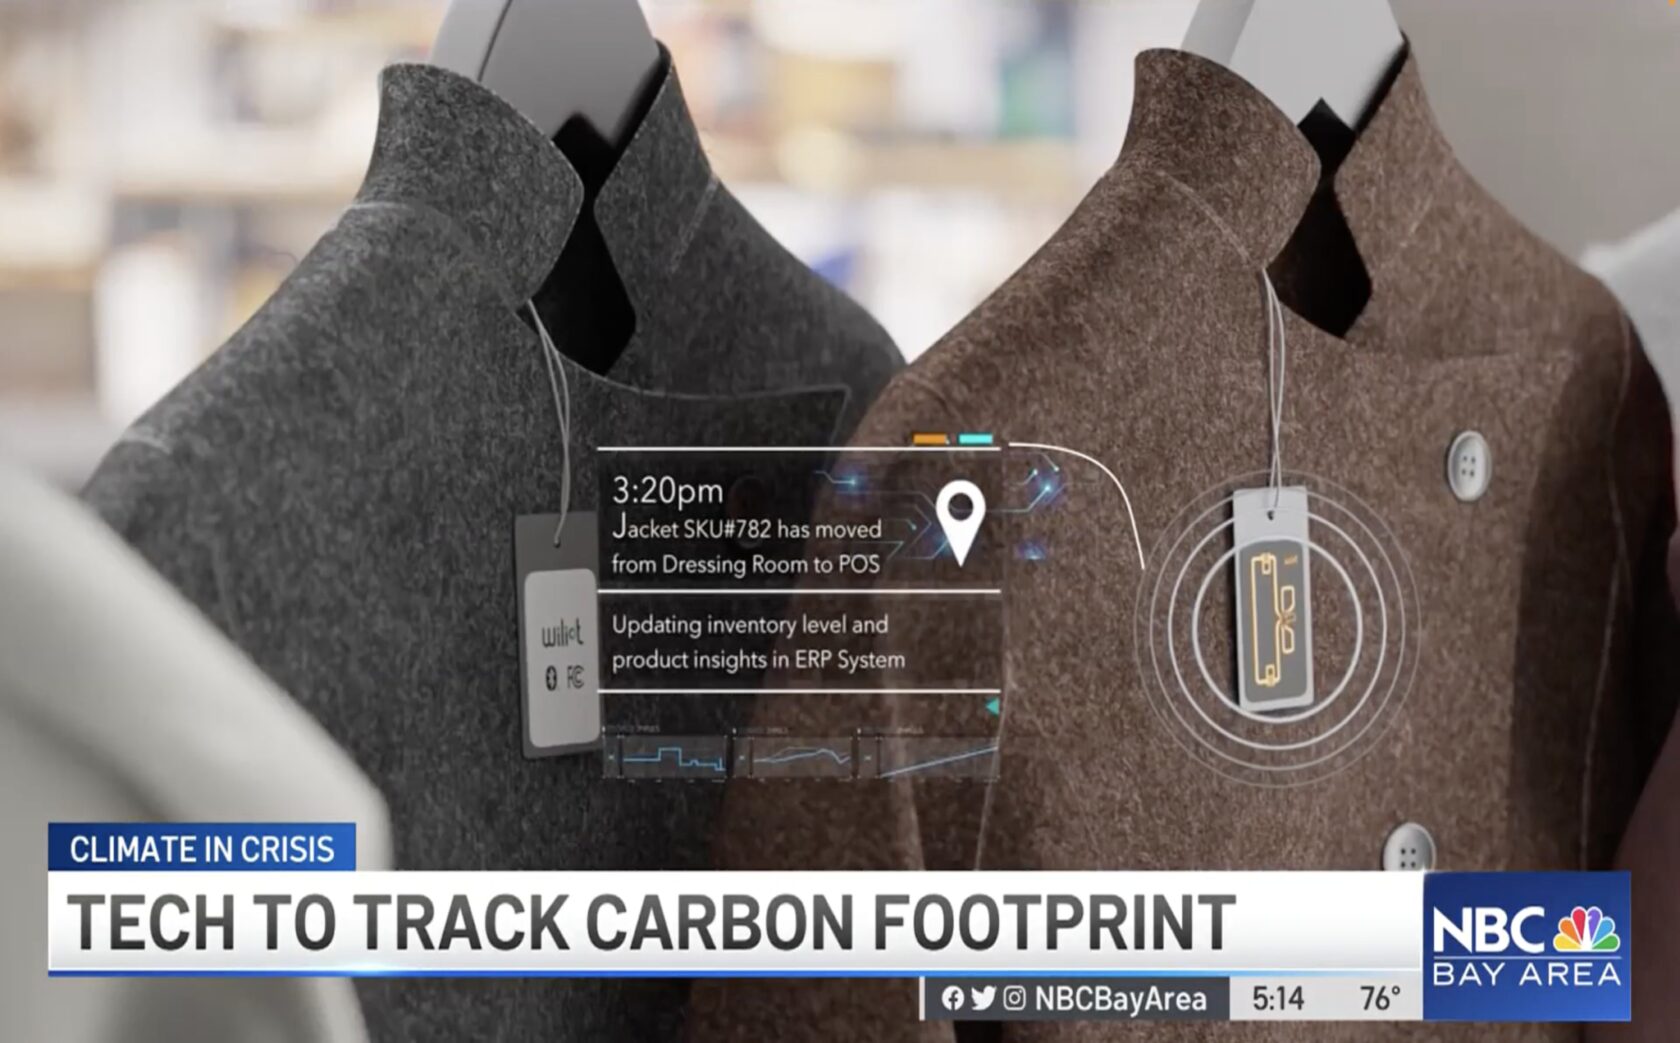 NBC Bay Area - Climate in Crisis: New gadget tracks carbon footprint to help fight climate change